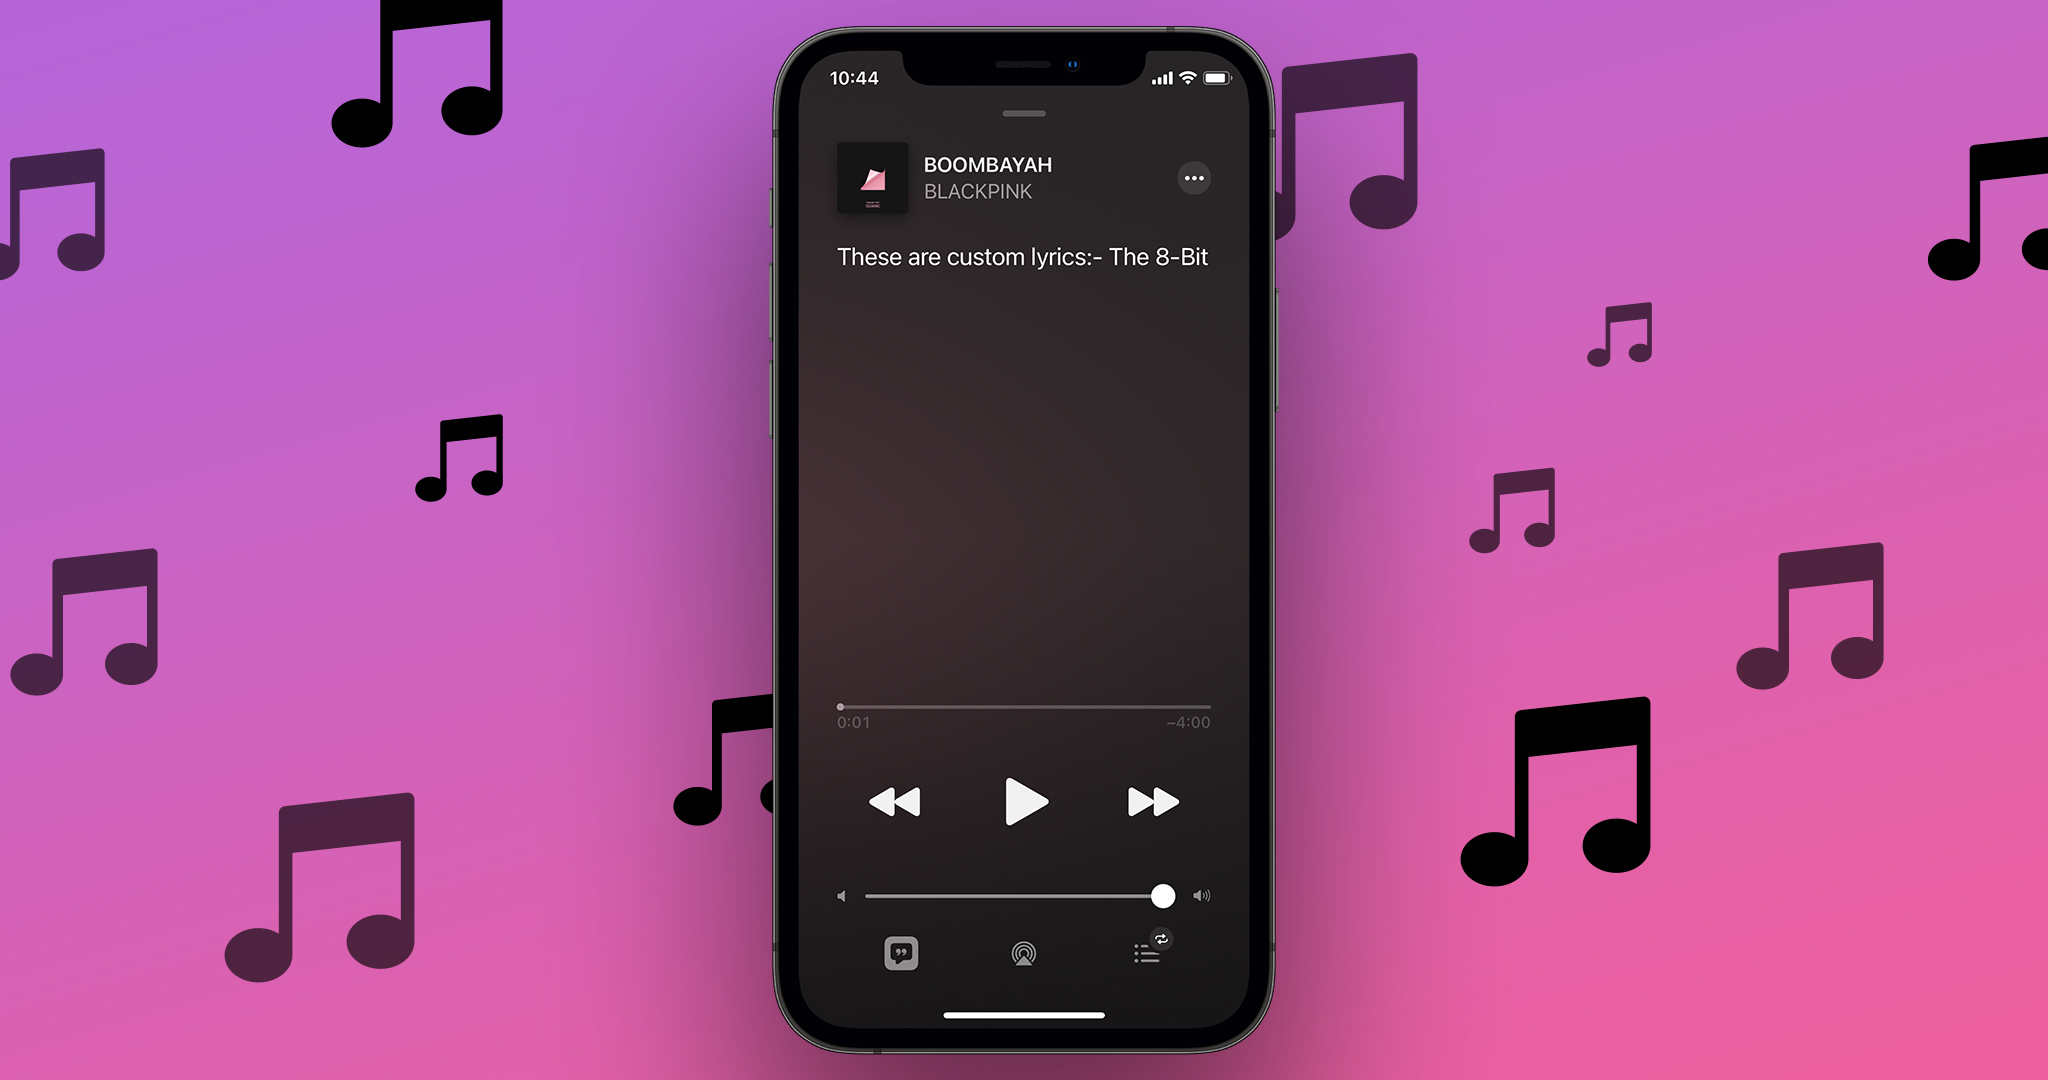 How to add lyrics to the wonderful songs in your Apple Music Library